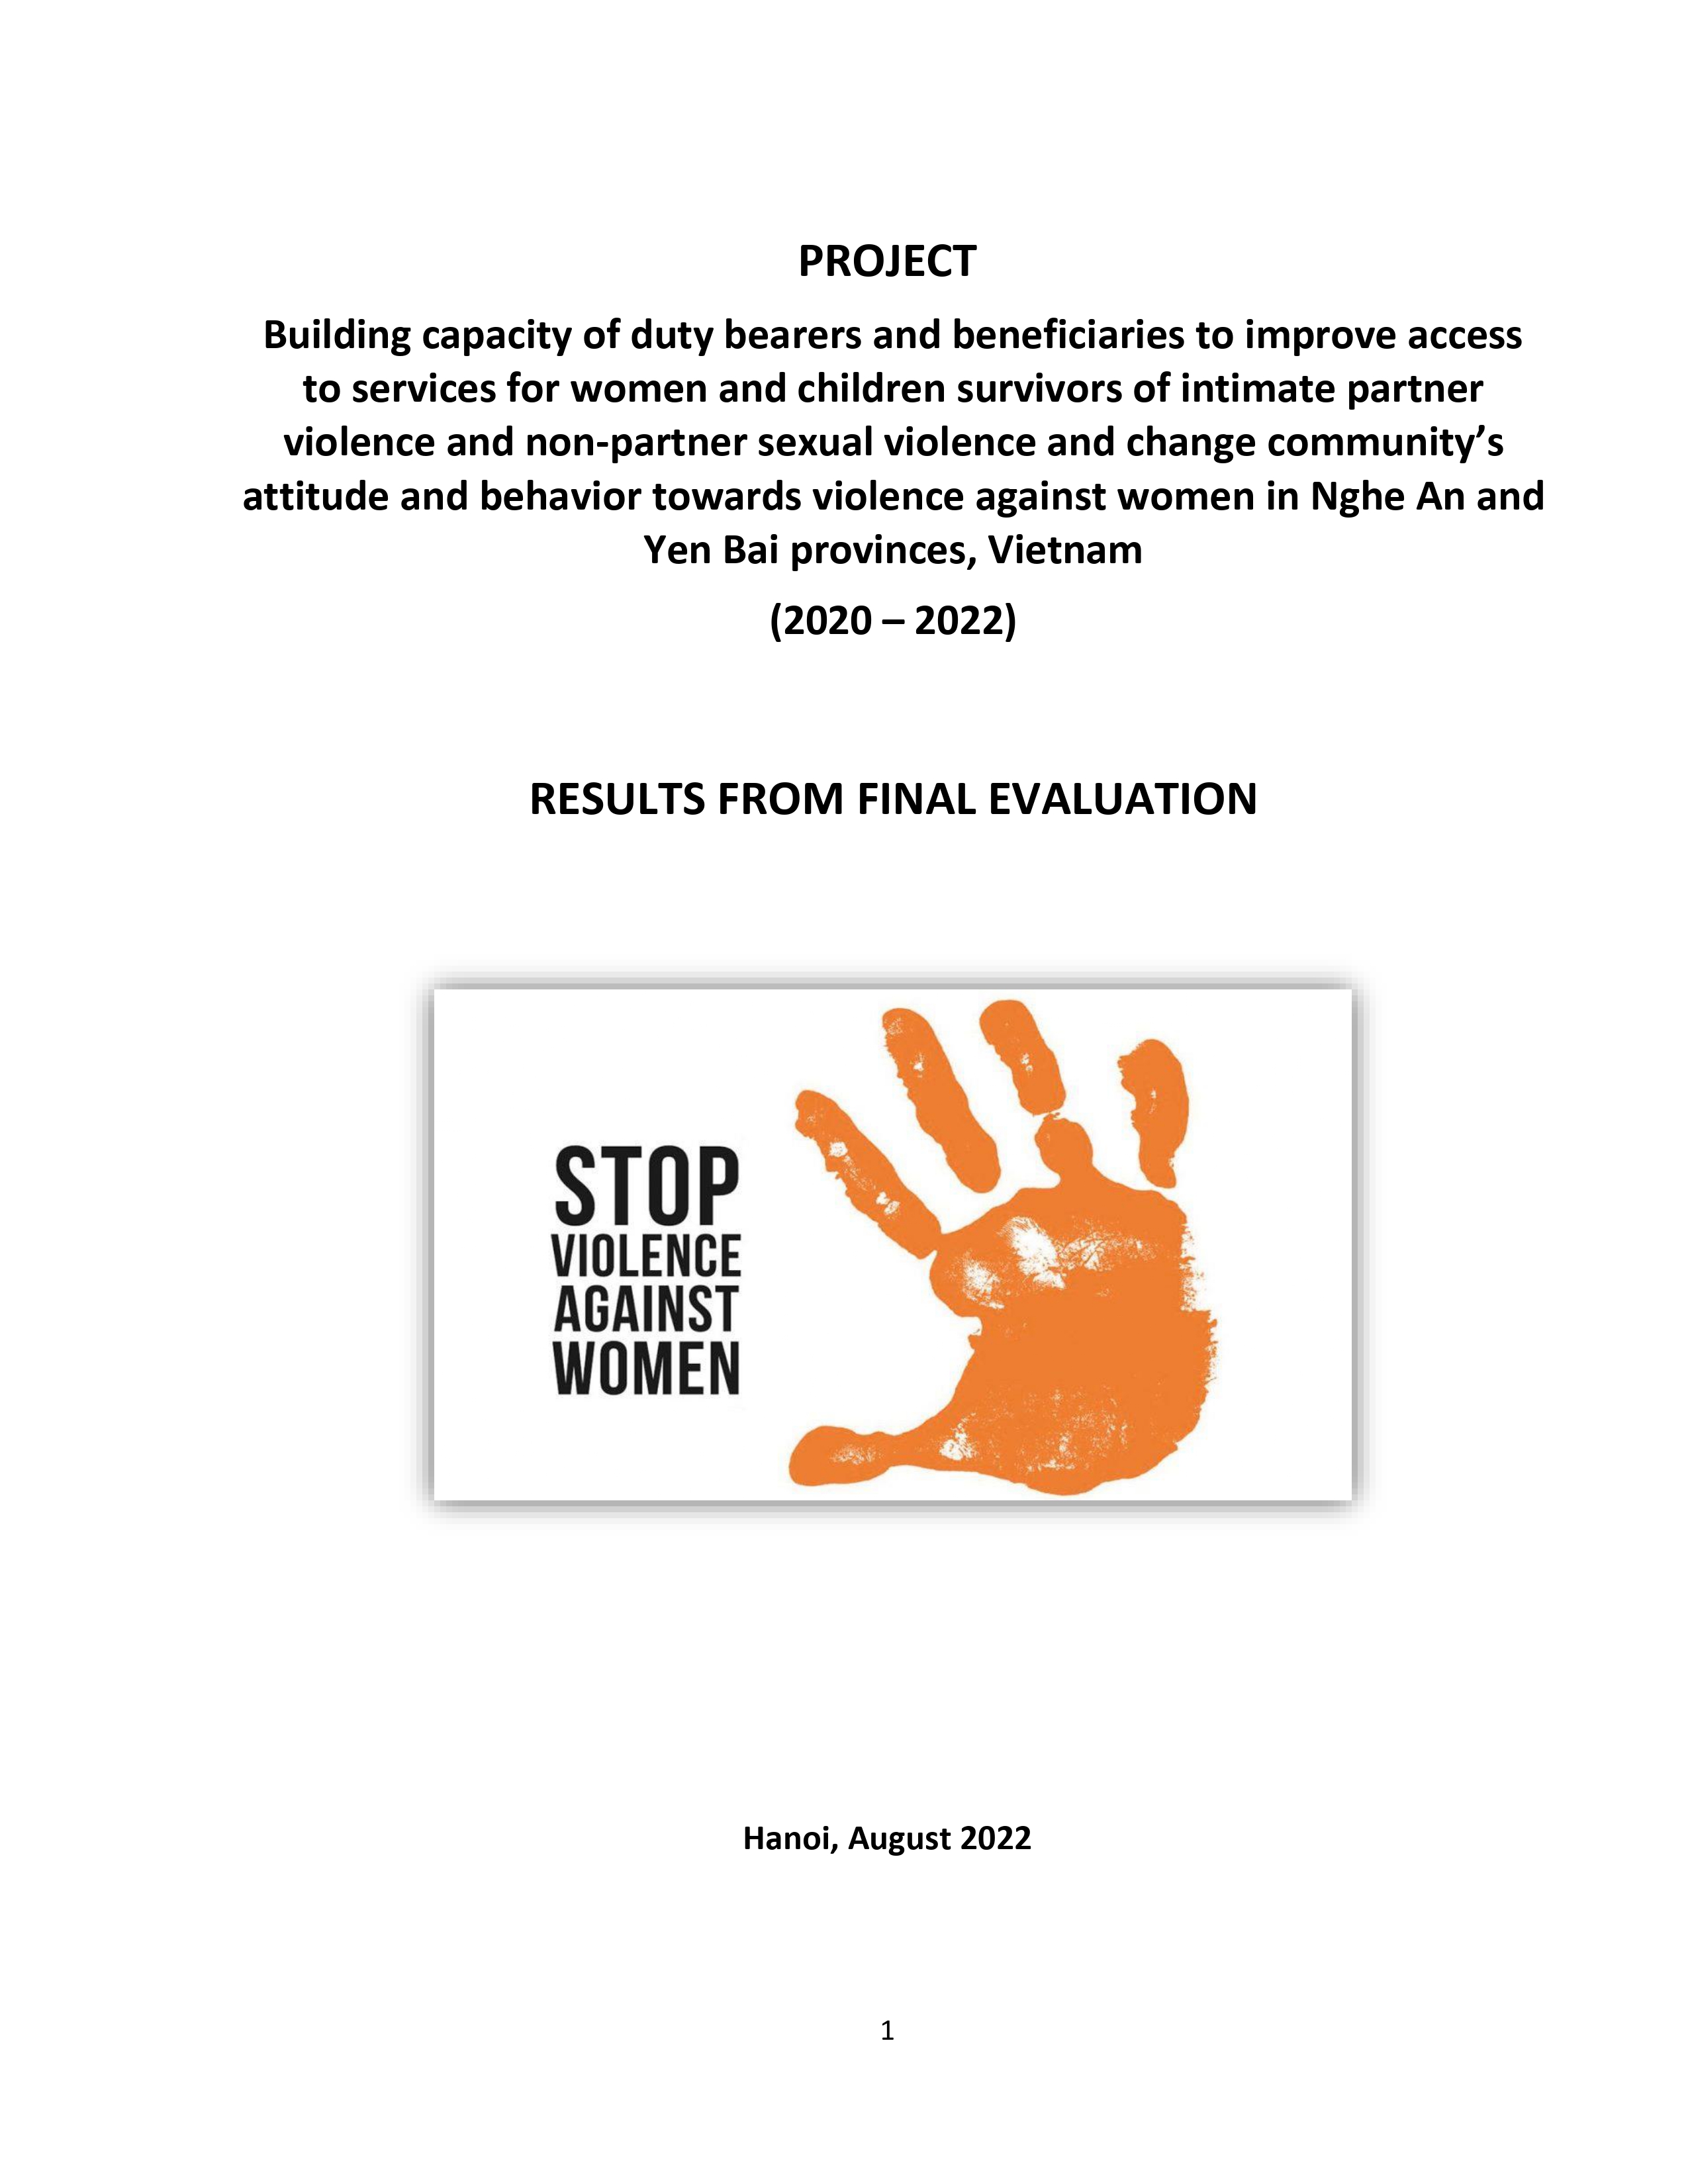 Final Evaluation: Building capacity of duty bearers and beneficiaries to improve access to services for women and children survivors of intimate partner violence and non-partner sexual violence and change community’s attitude and behaviour towards violenc